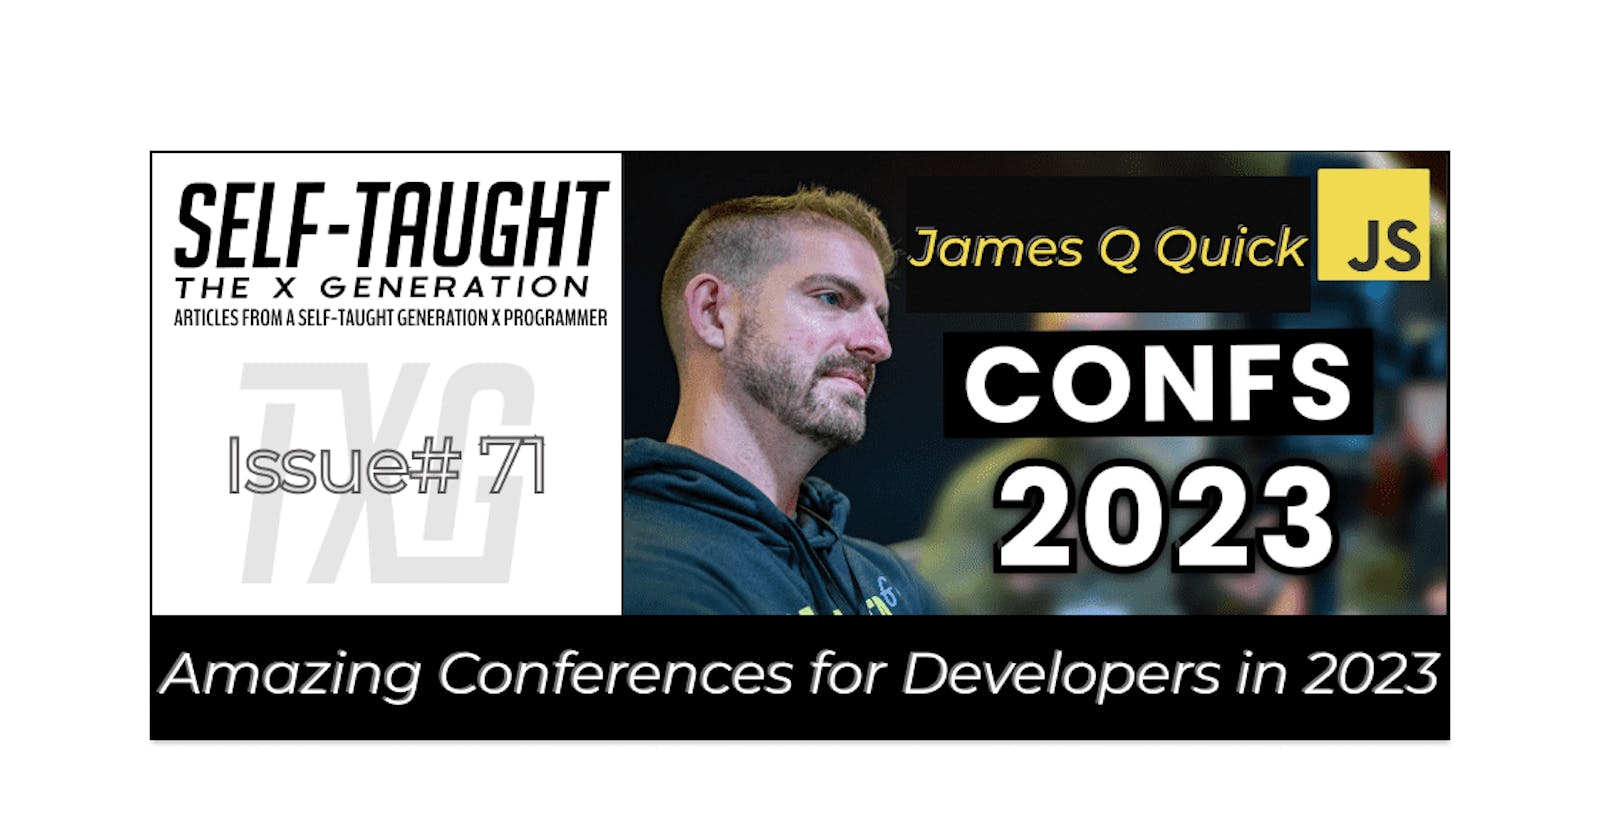 Amazing Conferences for Developers in 2023